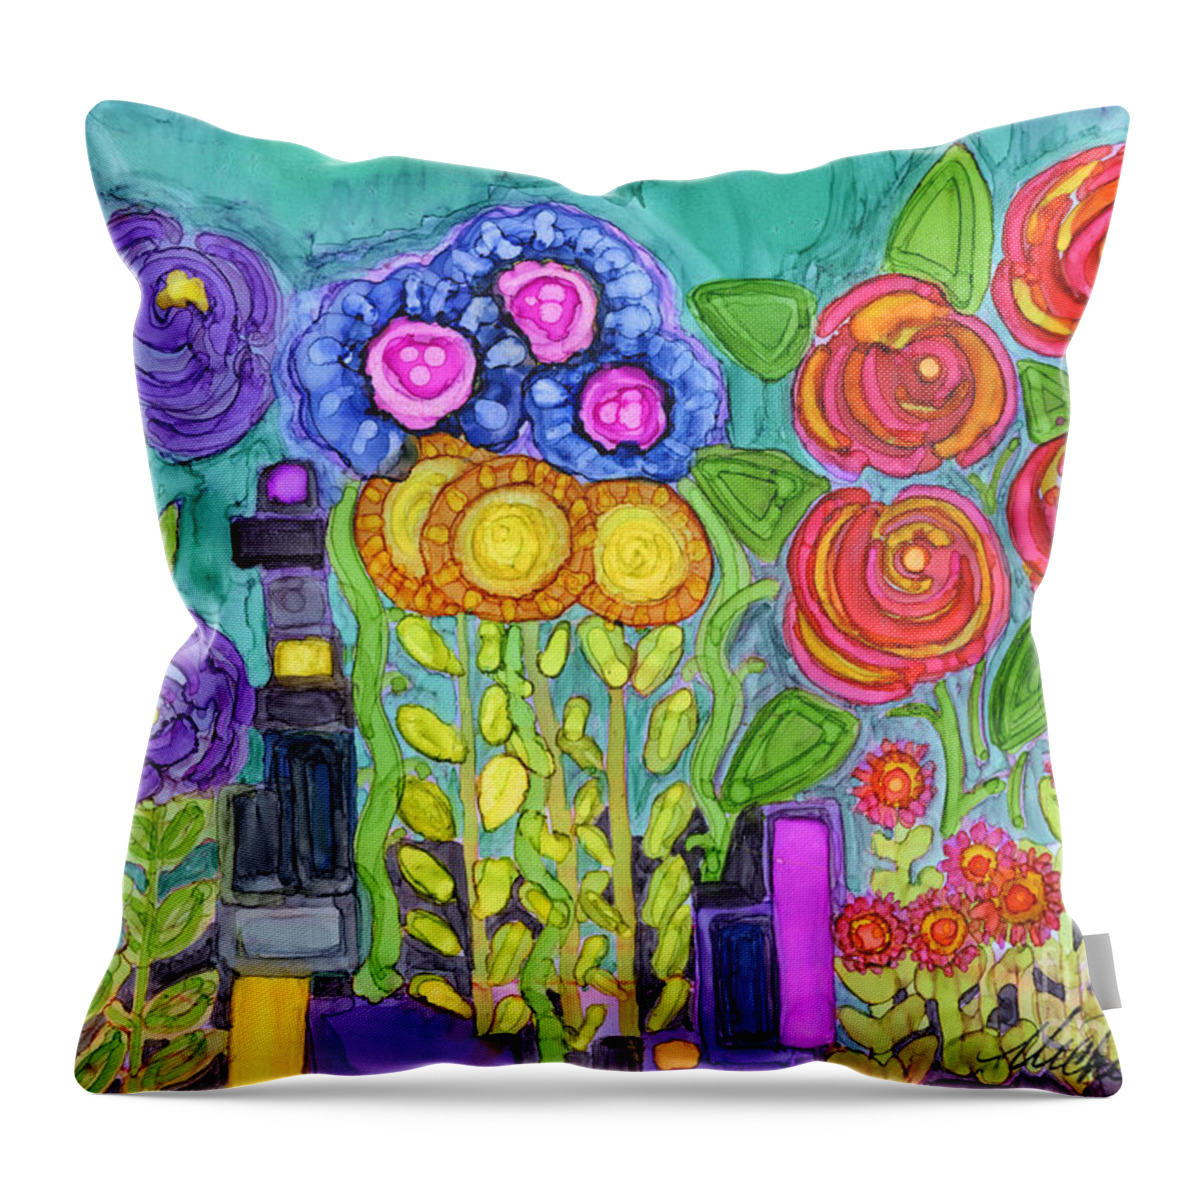 Abstract Throw Pillow featuring the painting Living Color by Vicki Baun Barry